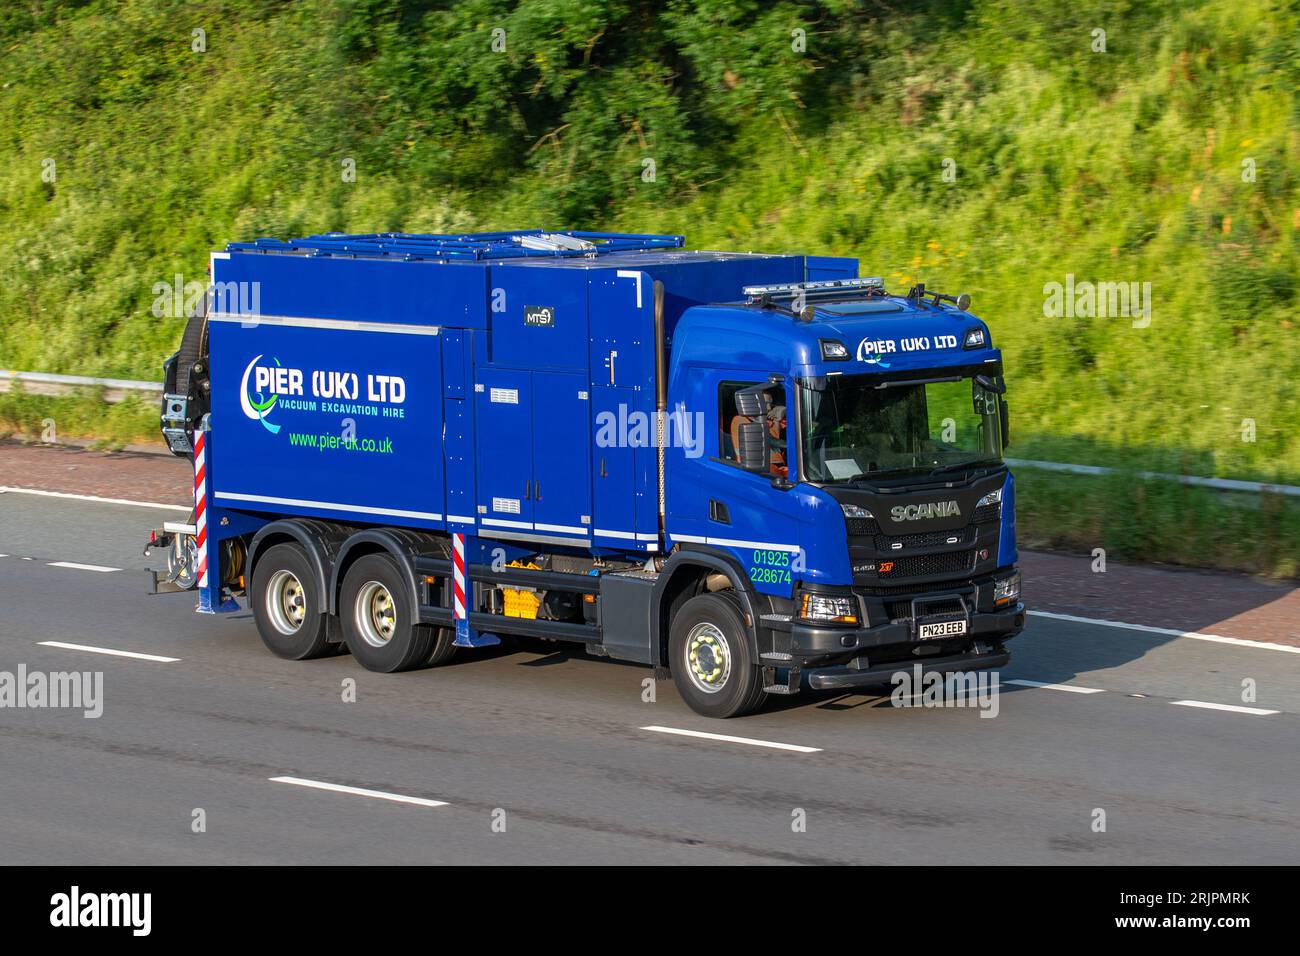 PIER (UK) Ltd, Plant and machinery, Long-term hire of suction excavators  in Newton-le-Willows, England travelling on the M6 motorway in Greater Manchester, UK Stock Photo